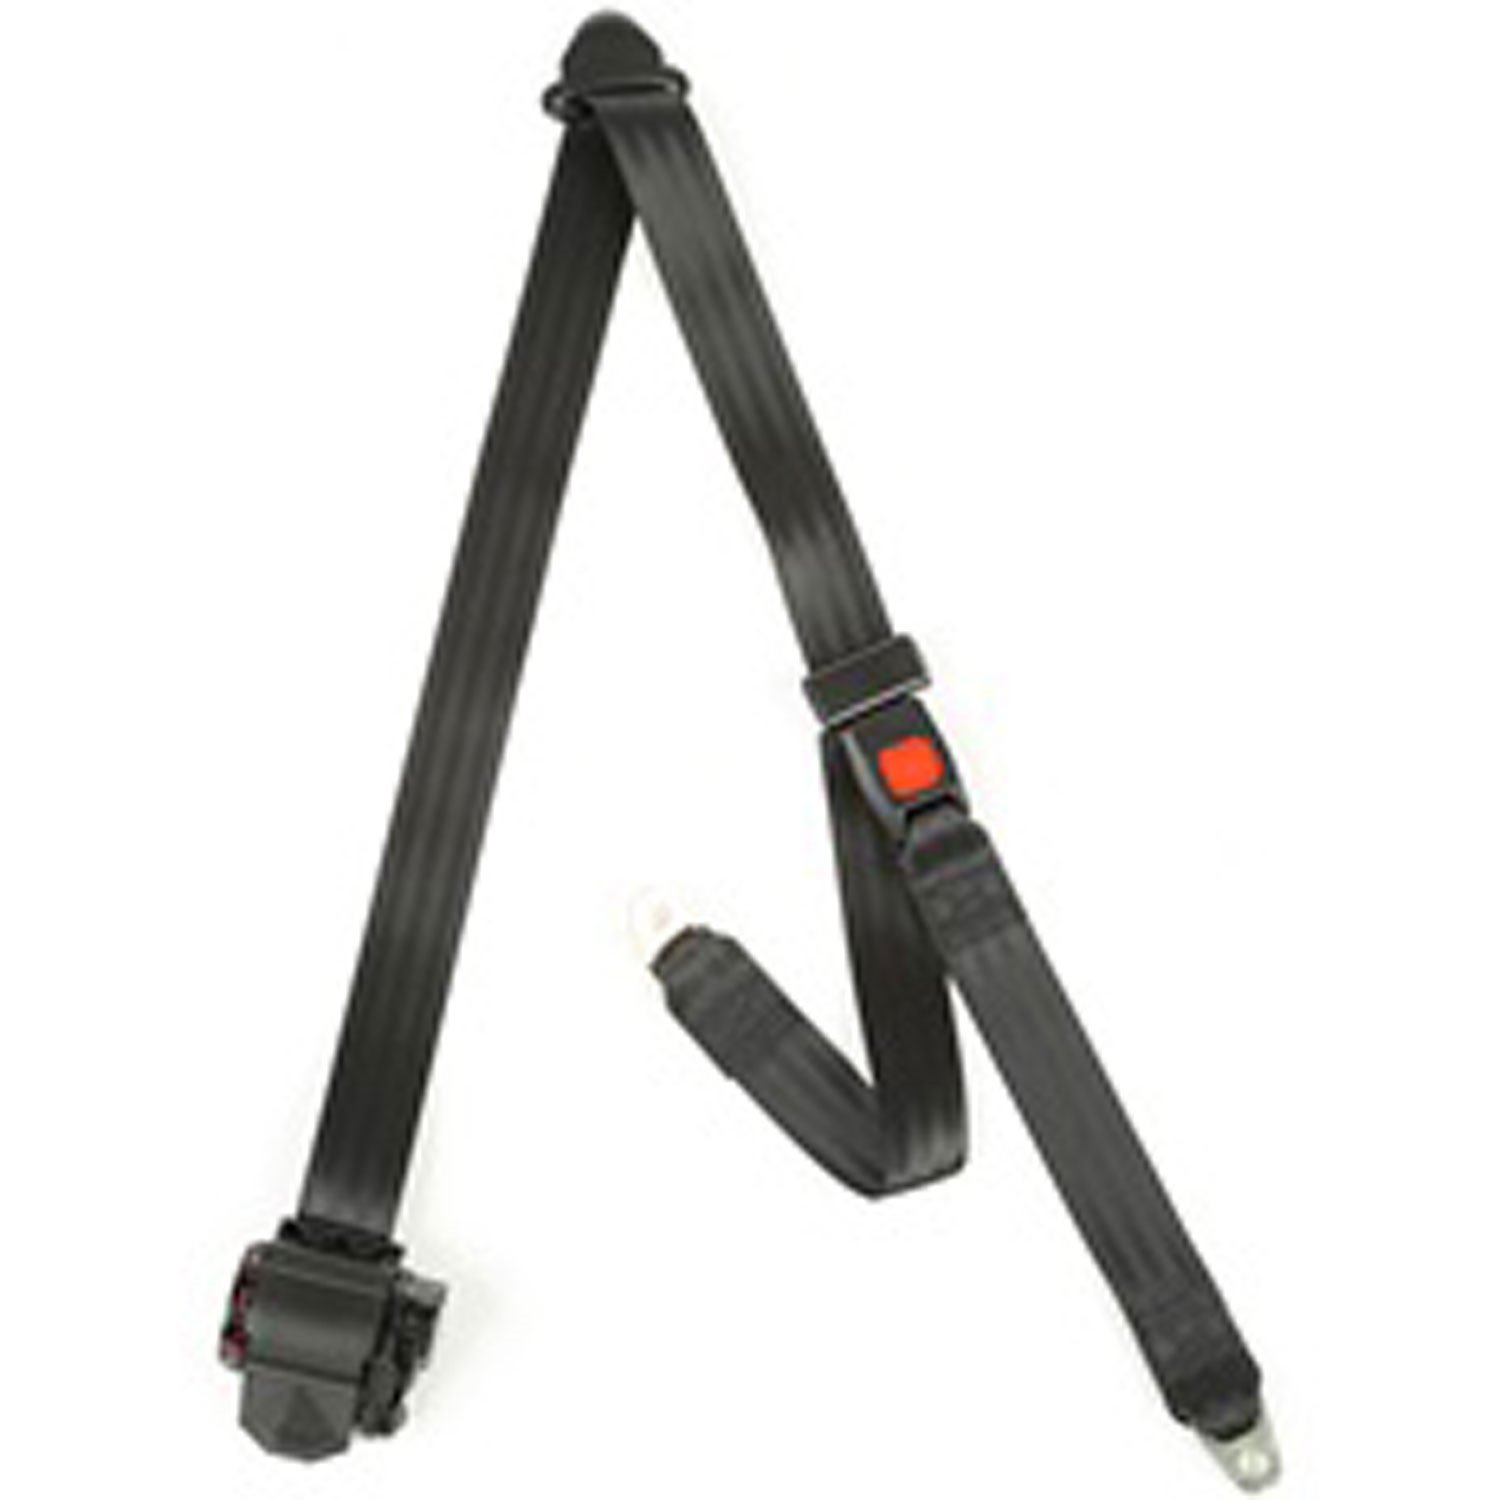 This black 3-point tri-lock off road seat belt fits the front seats in 87-91 Jeep Wrangler YJ. Sold